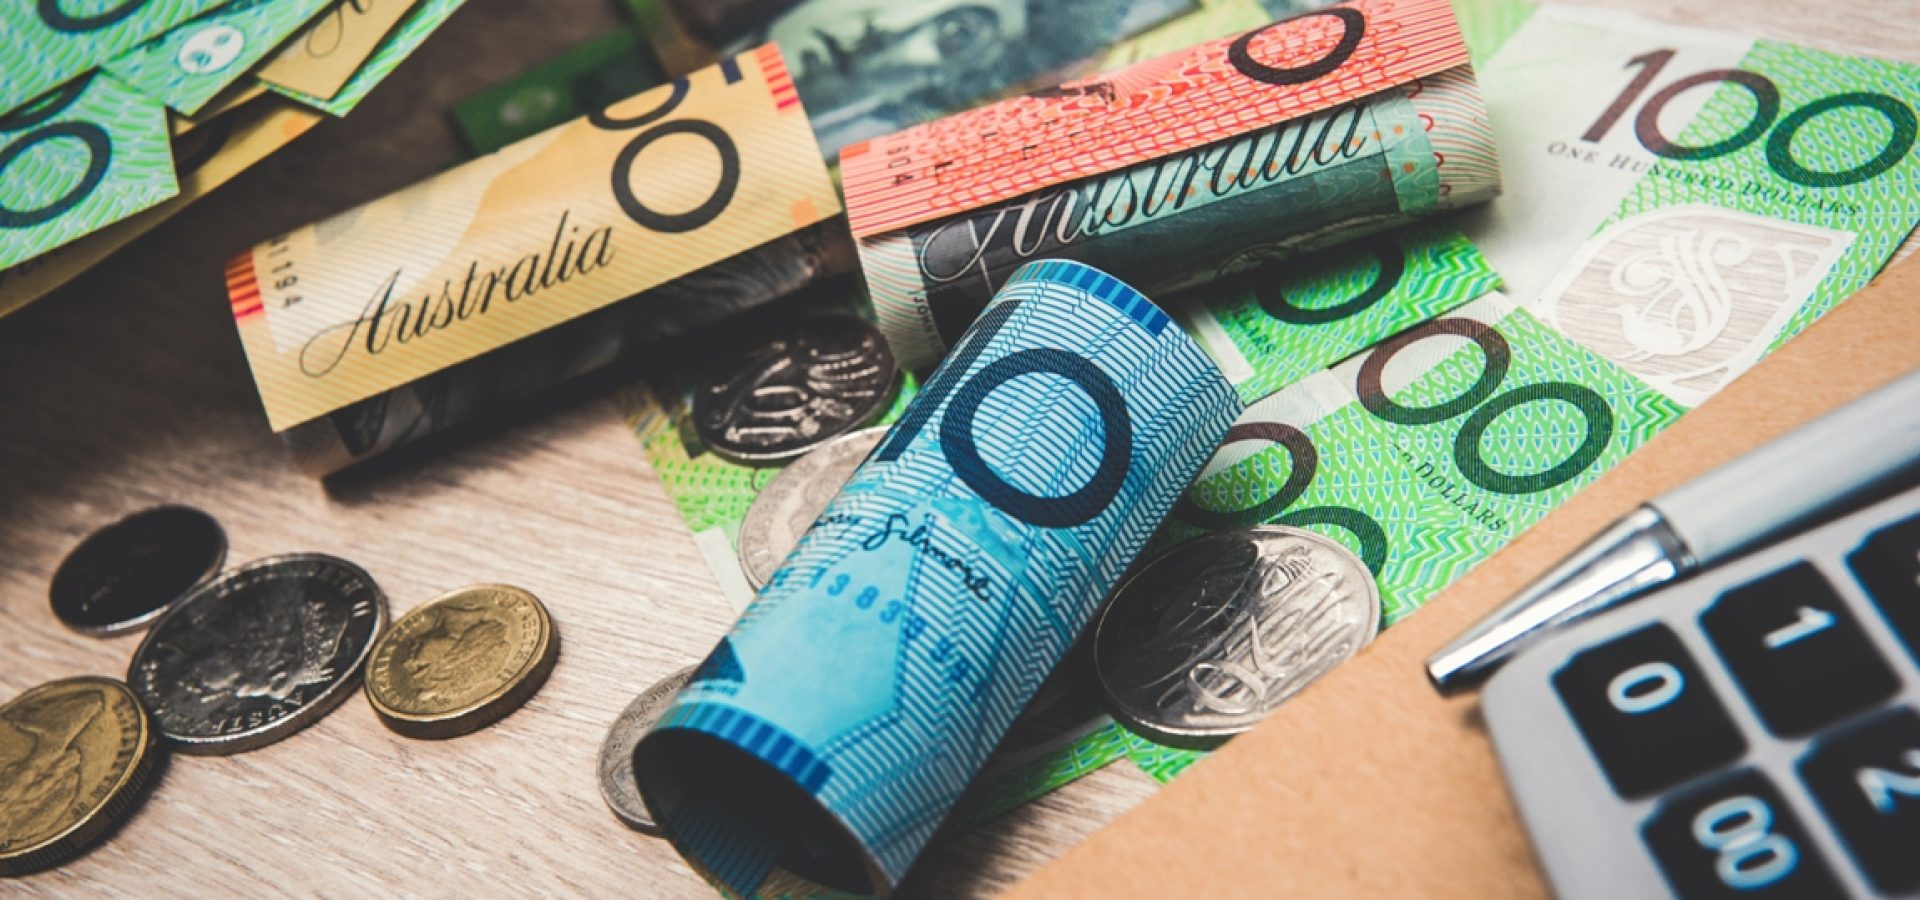 The Euro Fluctuates; What about Aussie and Other Currencies?